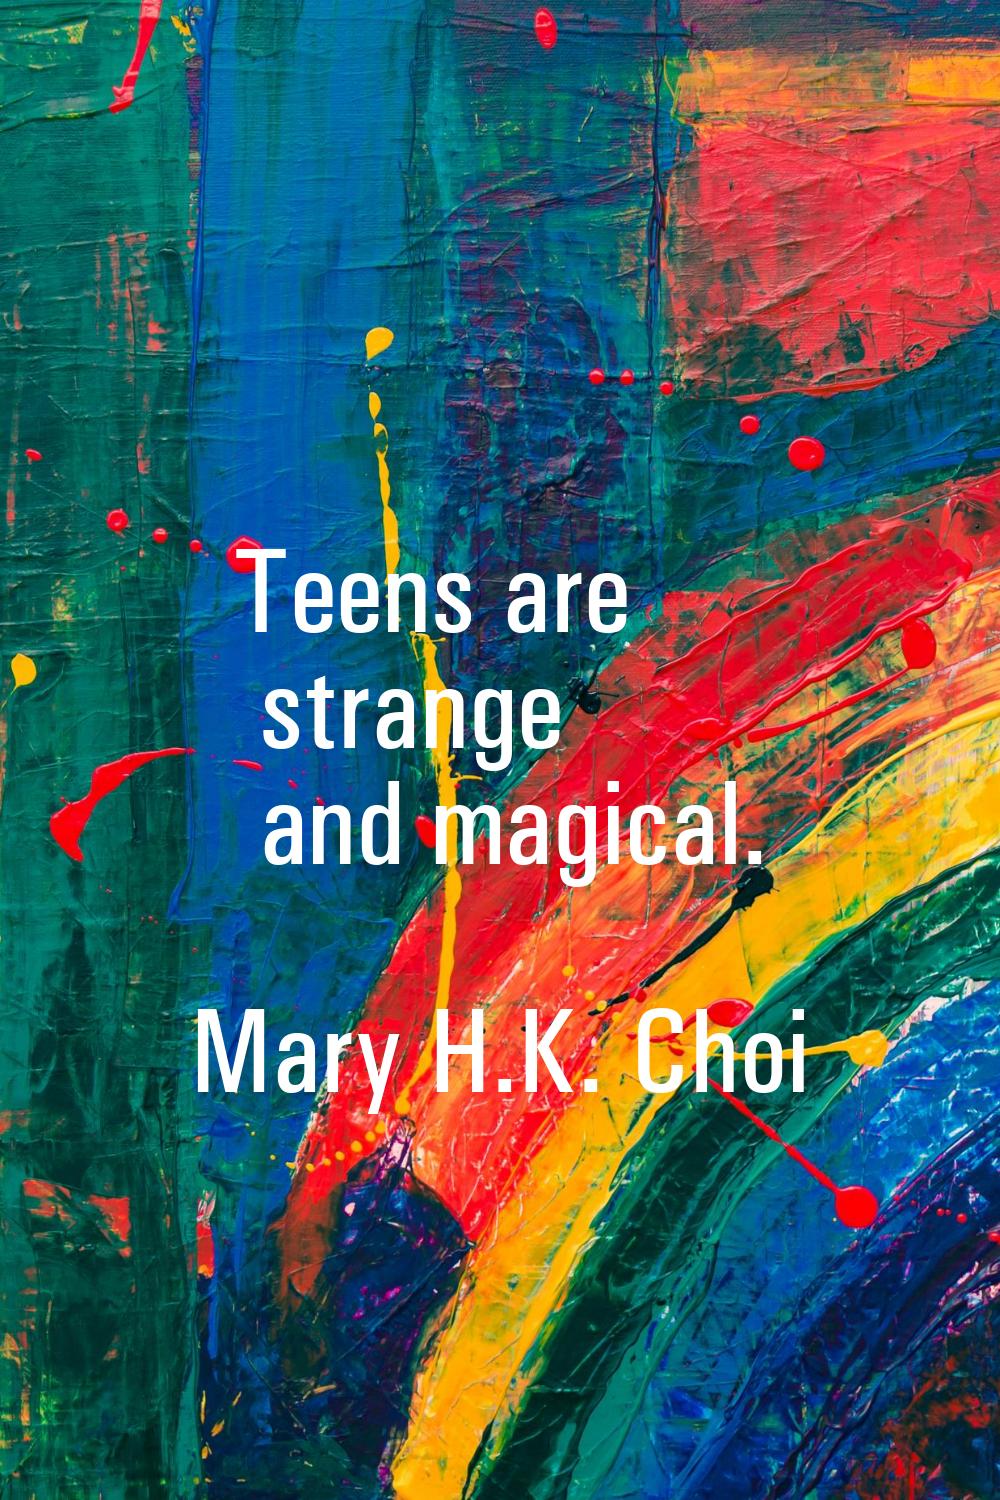 Teens are strange and magical.